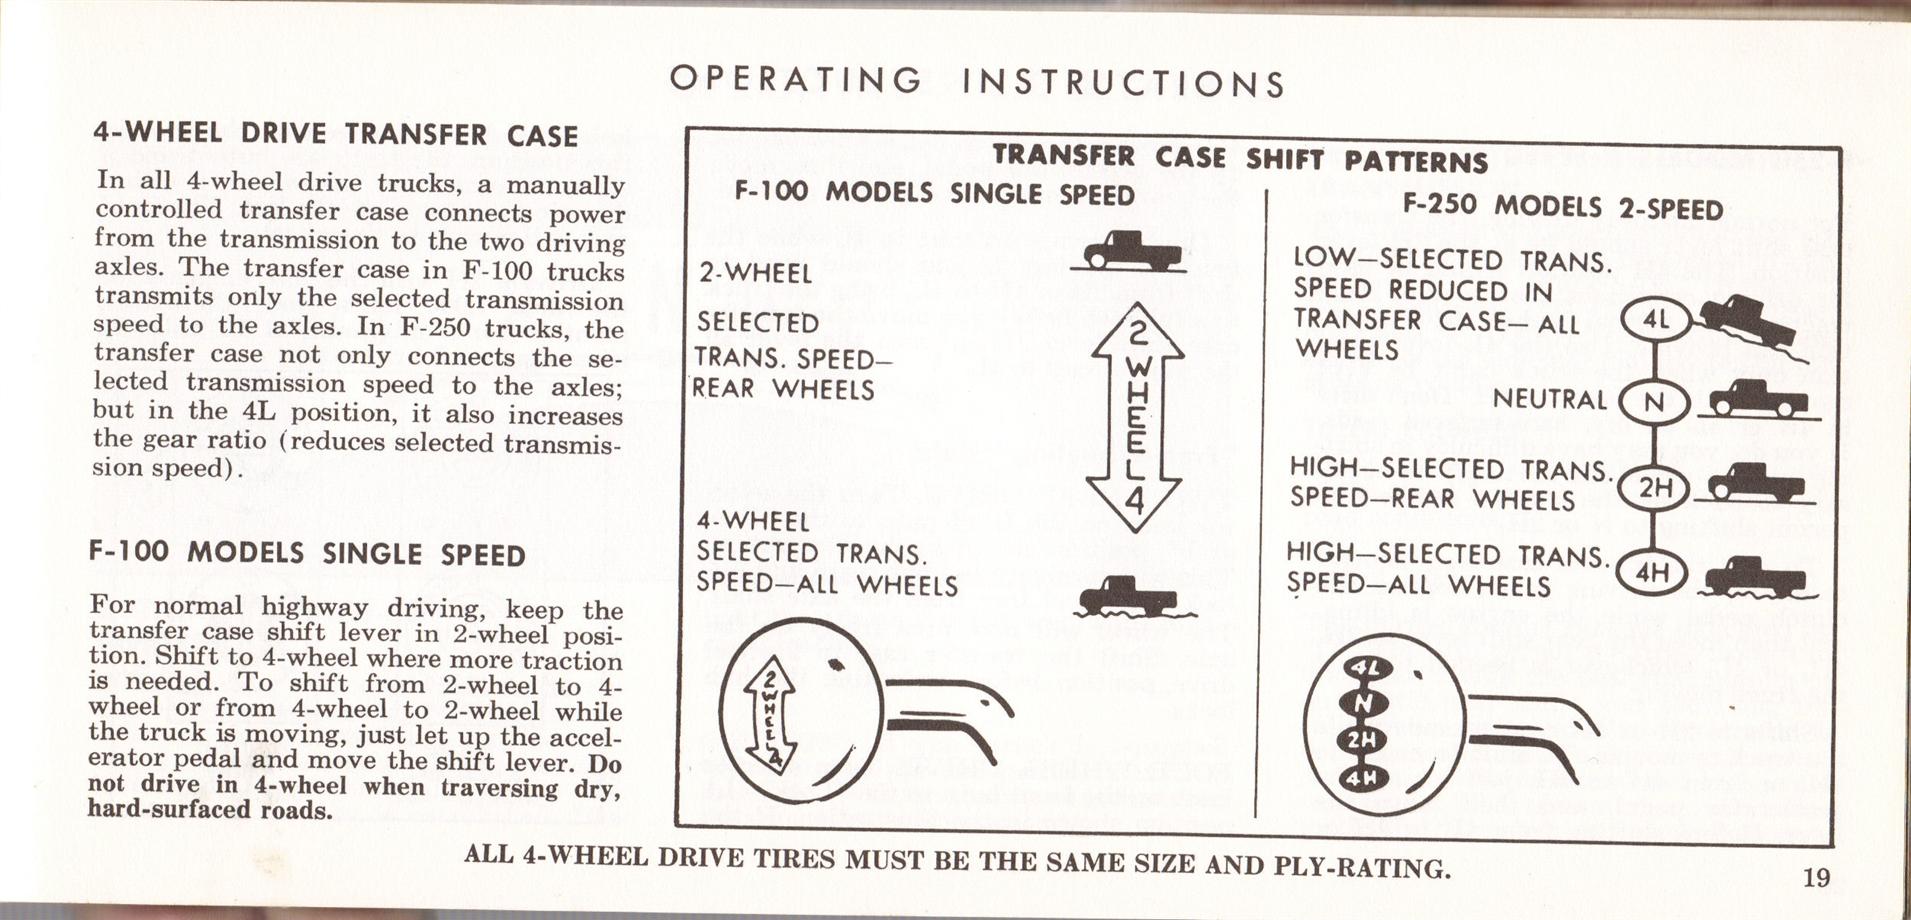 1969_Ford_Truck_Owners_Manual_Pg19